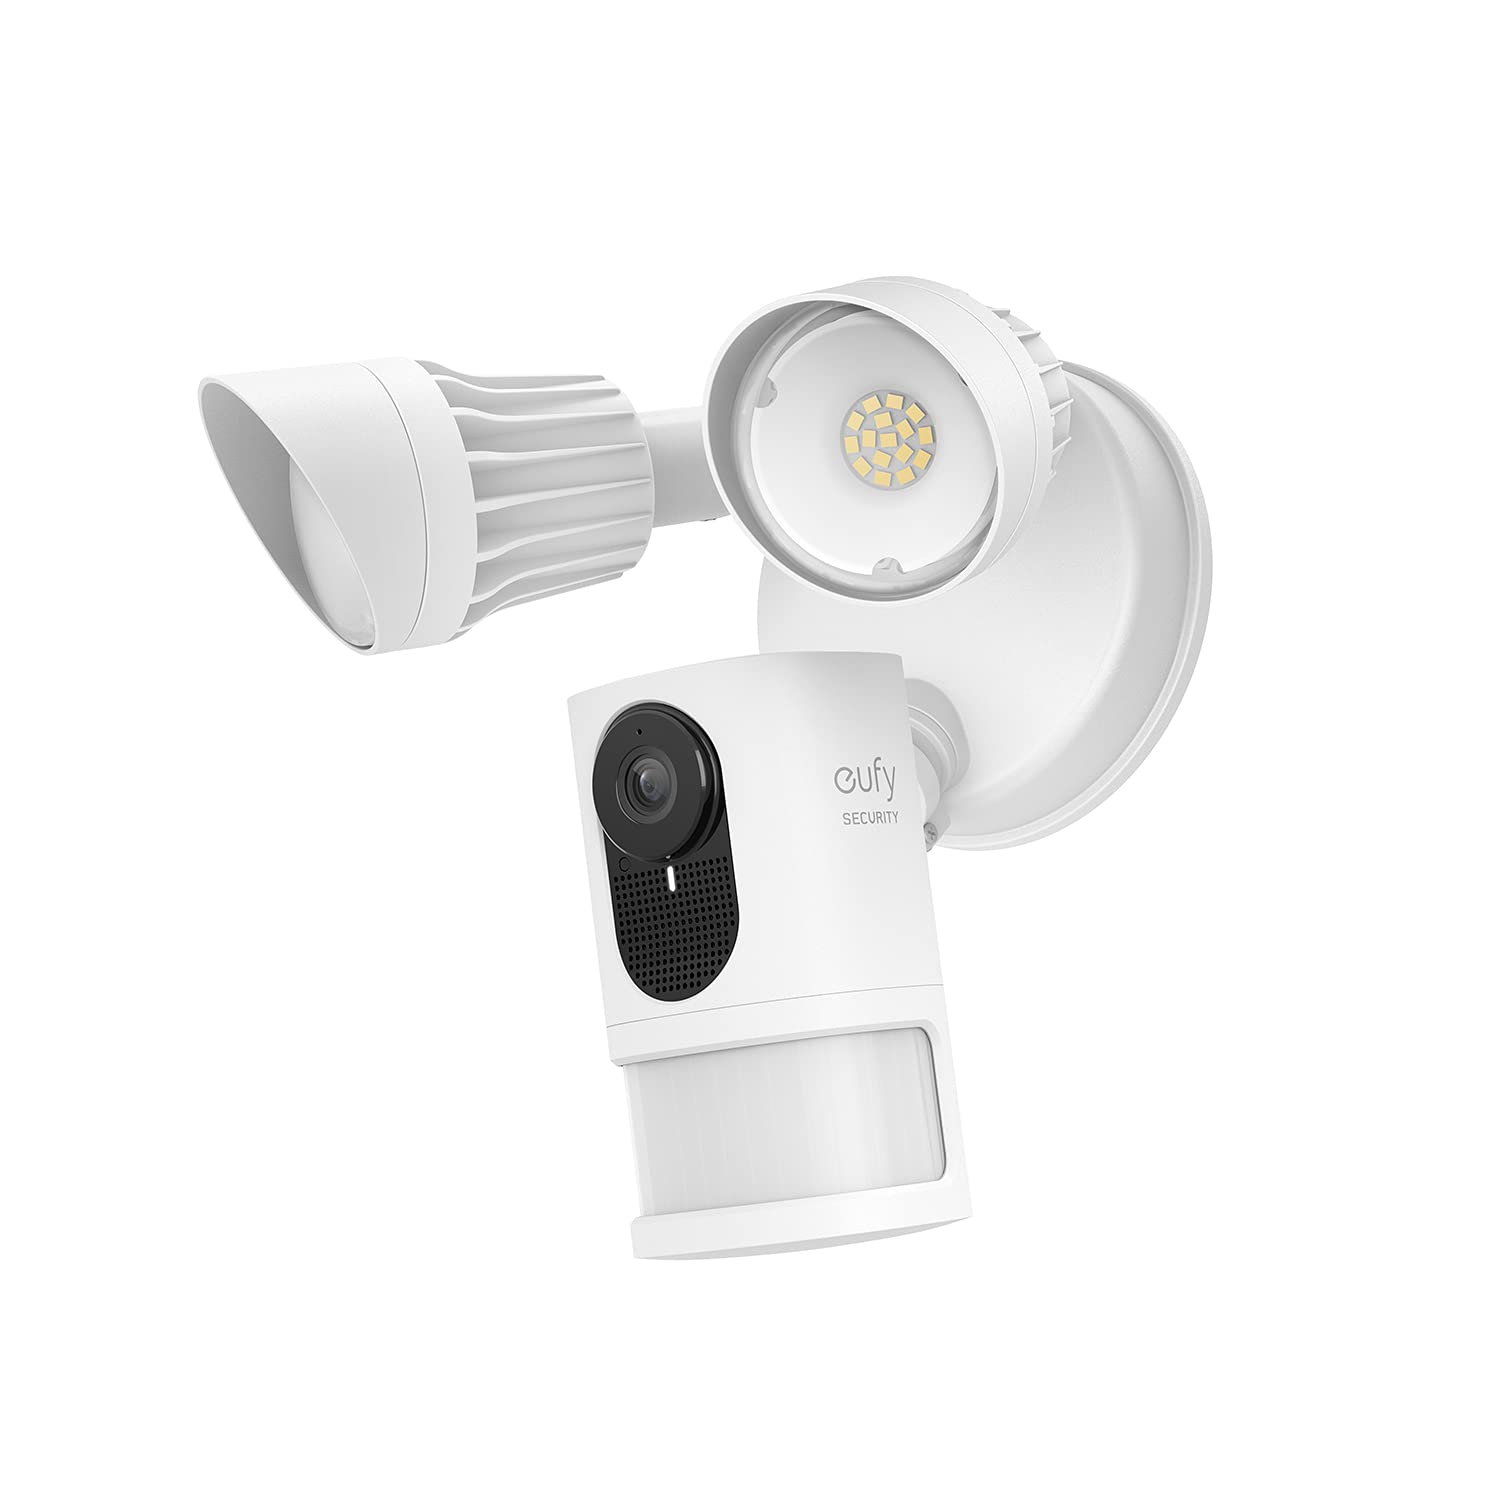 eufy Security Floodlight Cam E220, 2K, No Monthly Fees, 2000 Lumens, Weatherproof, Built-in AI, Non-Stop Power, Hardwired, Motion Only Alert $79.99